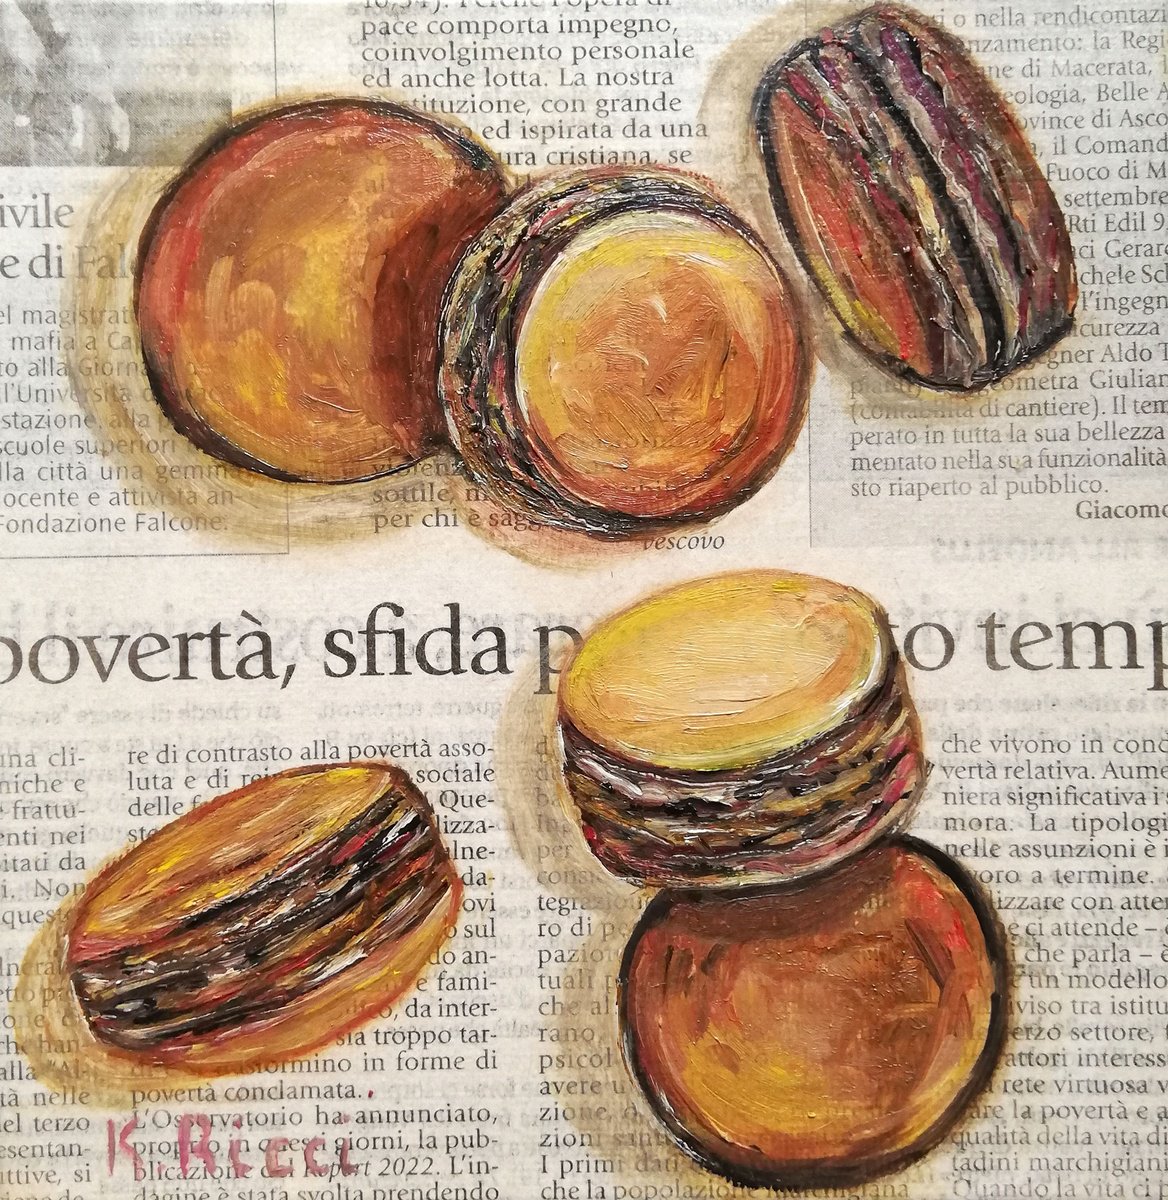 Macaroons on Newspaper Original Oil on Canvas Board Painting 6 by 6 inches (15x15 cm) by Katia Ricci